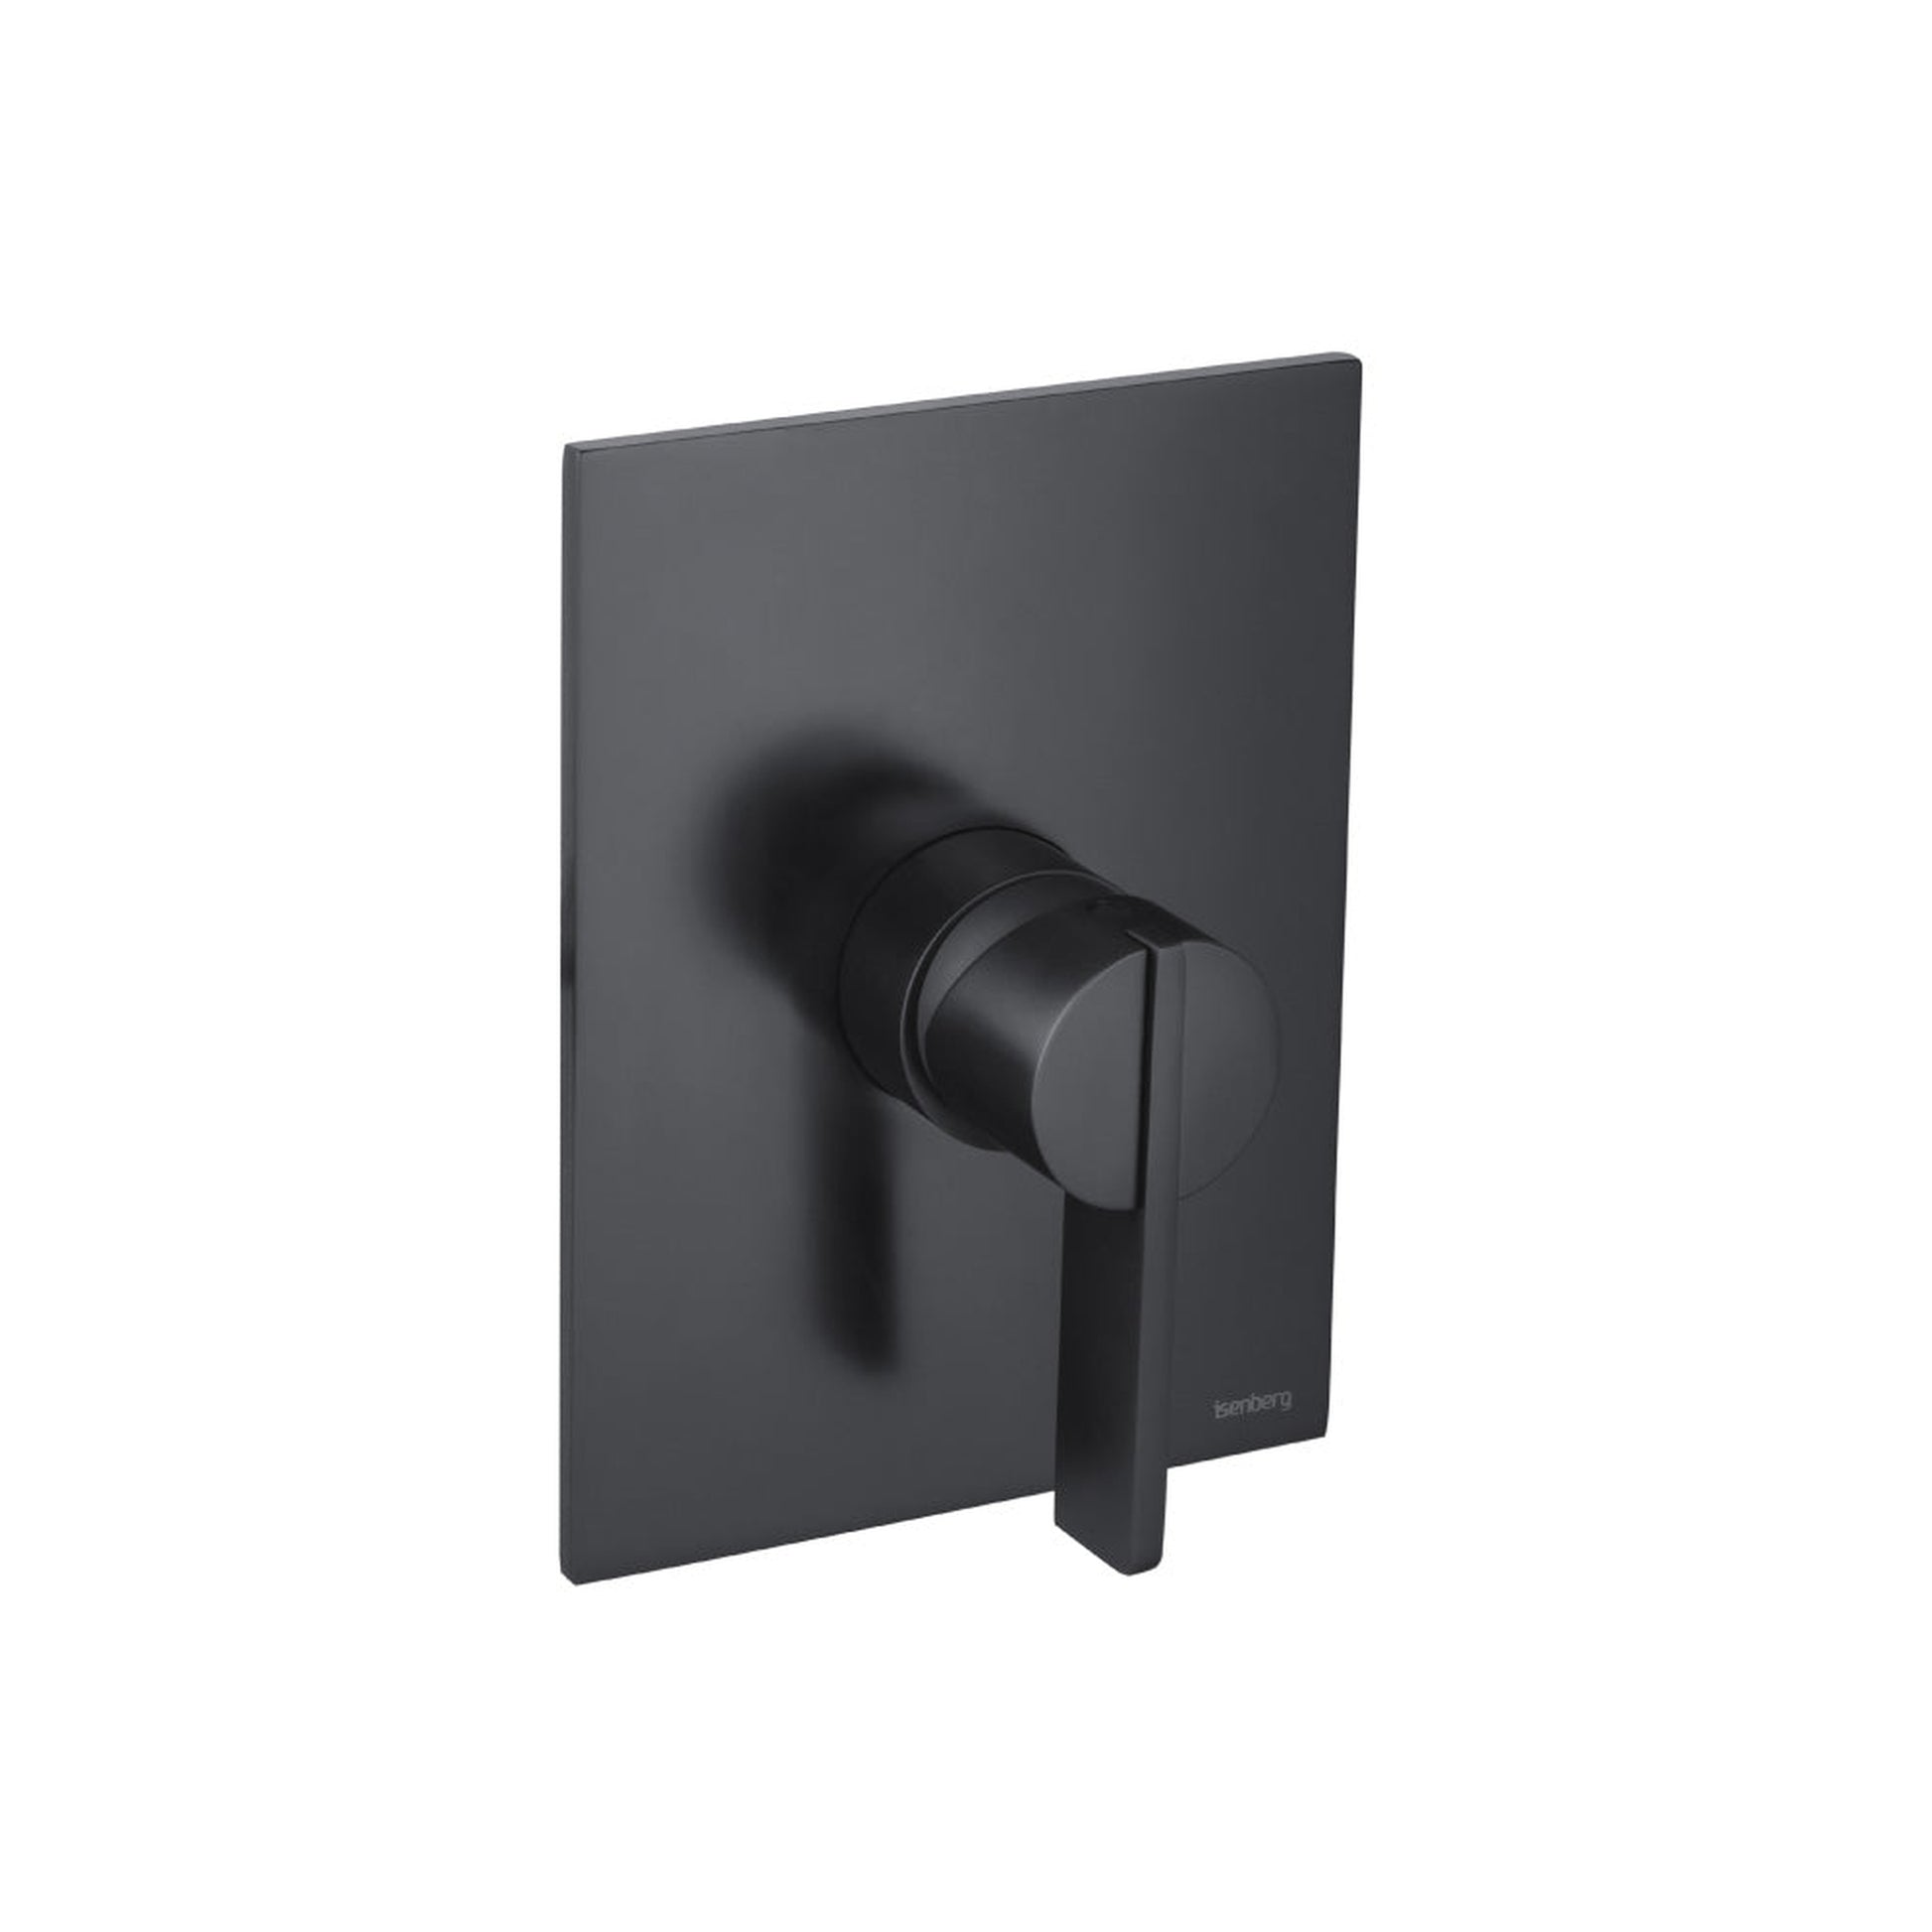 Isenberg Serie 145 Single Output Shower Trim and Handle in Matte Black